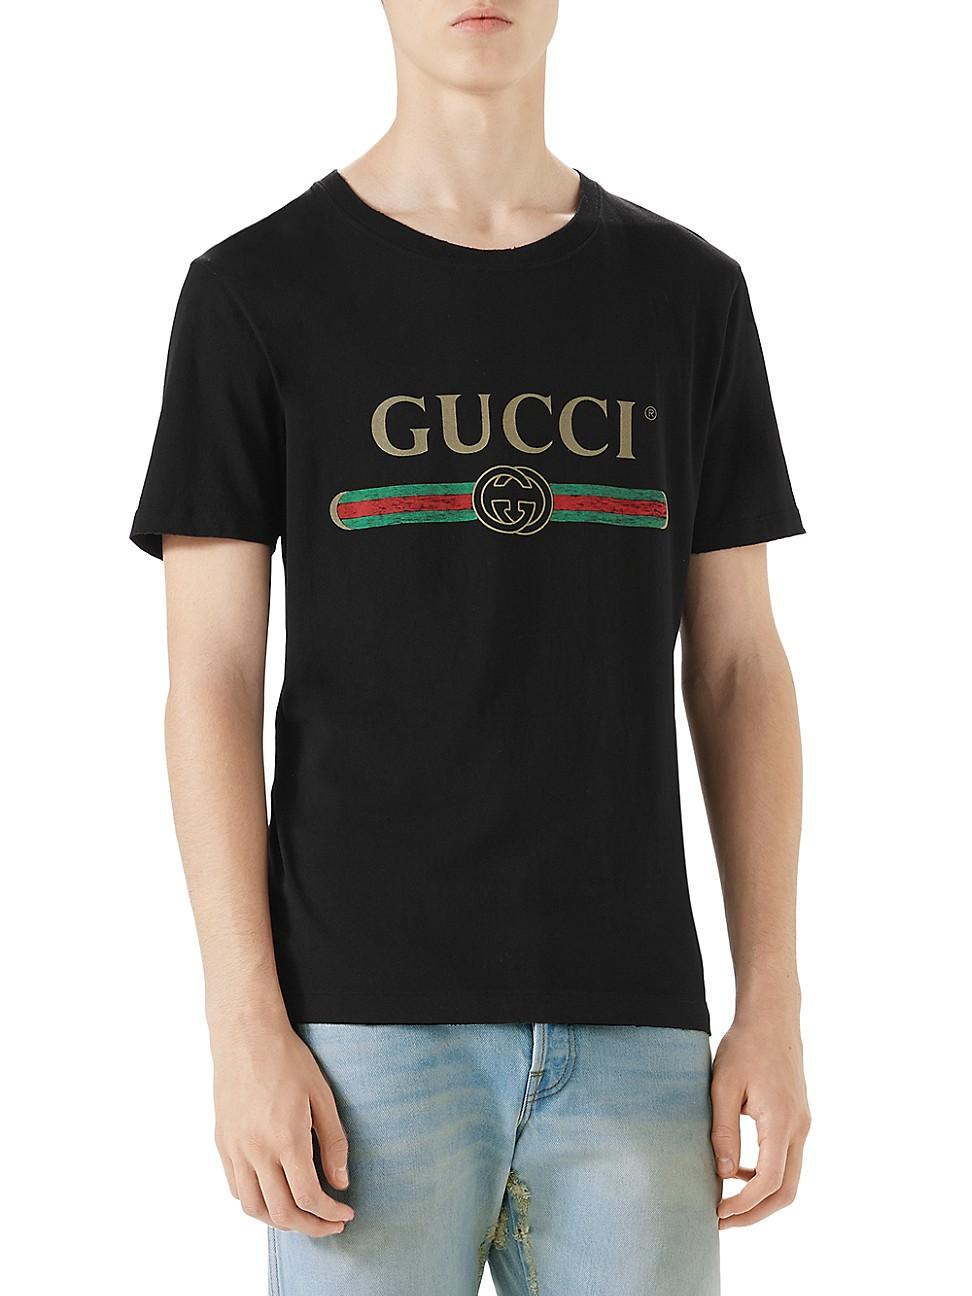 Gucci Cotton Distressed Fake Logo T Shirt in Black for Men - Save 41% - Lyst